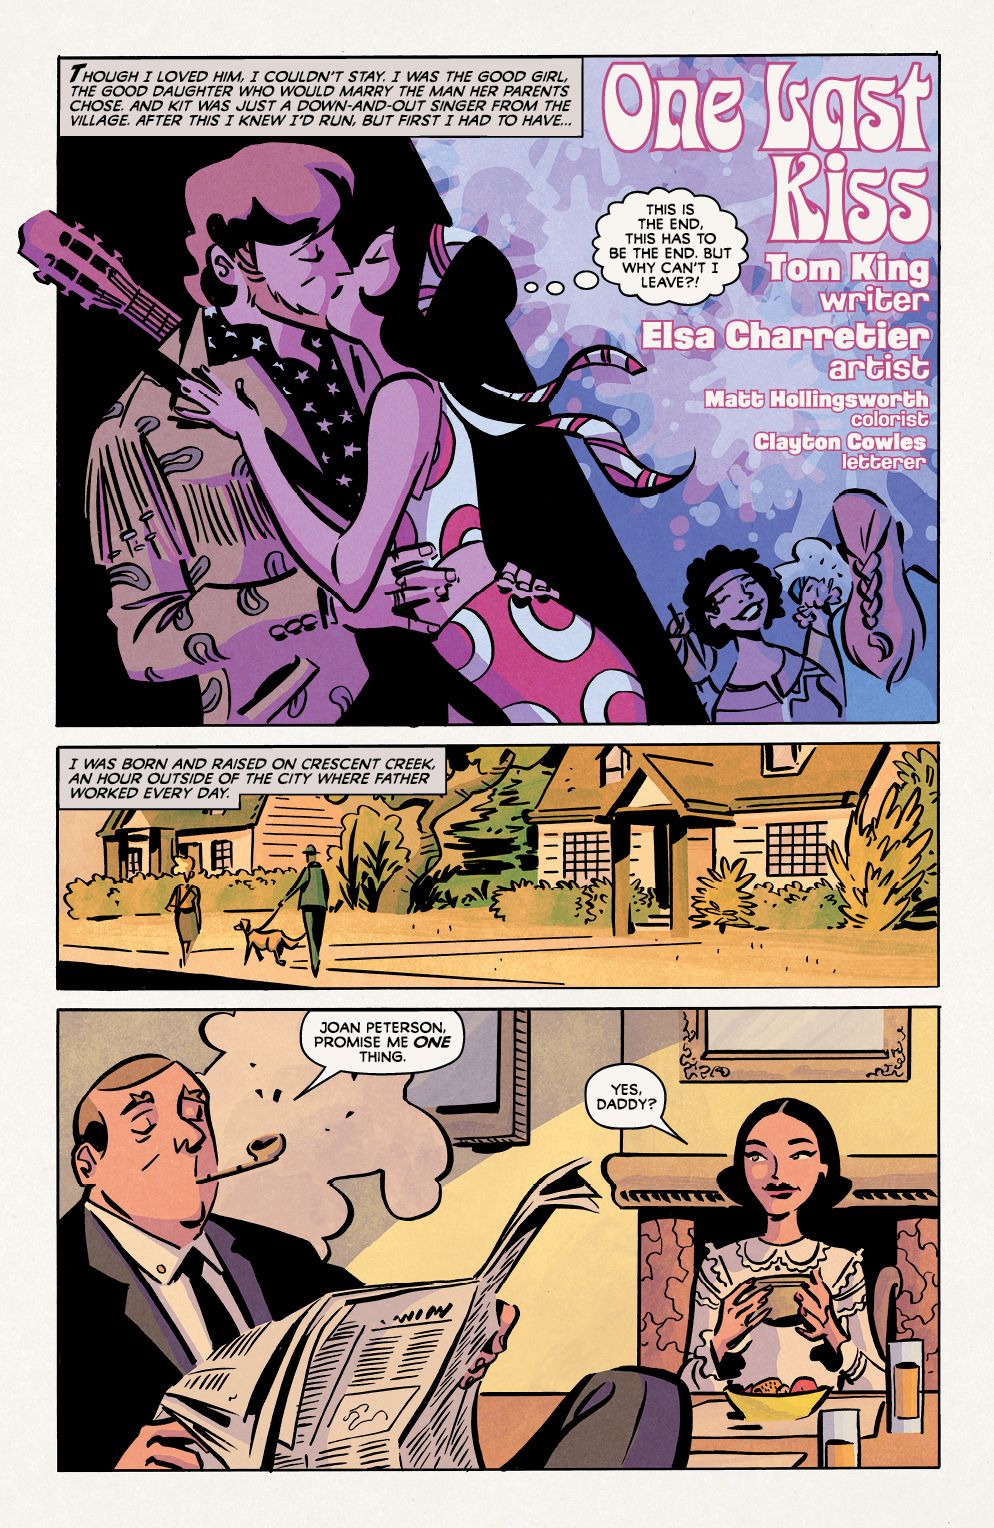 King and Charretier's Image Series Provides Endless Cycles Of Romance